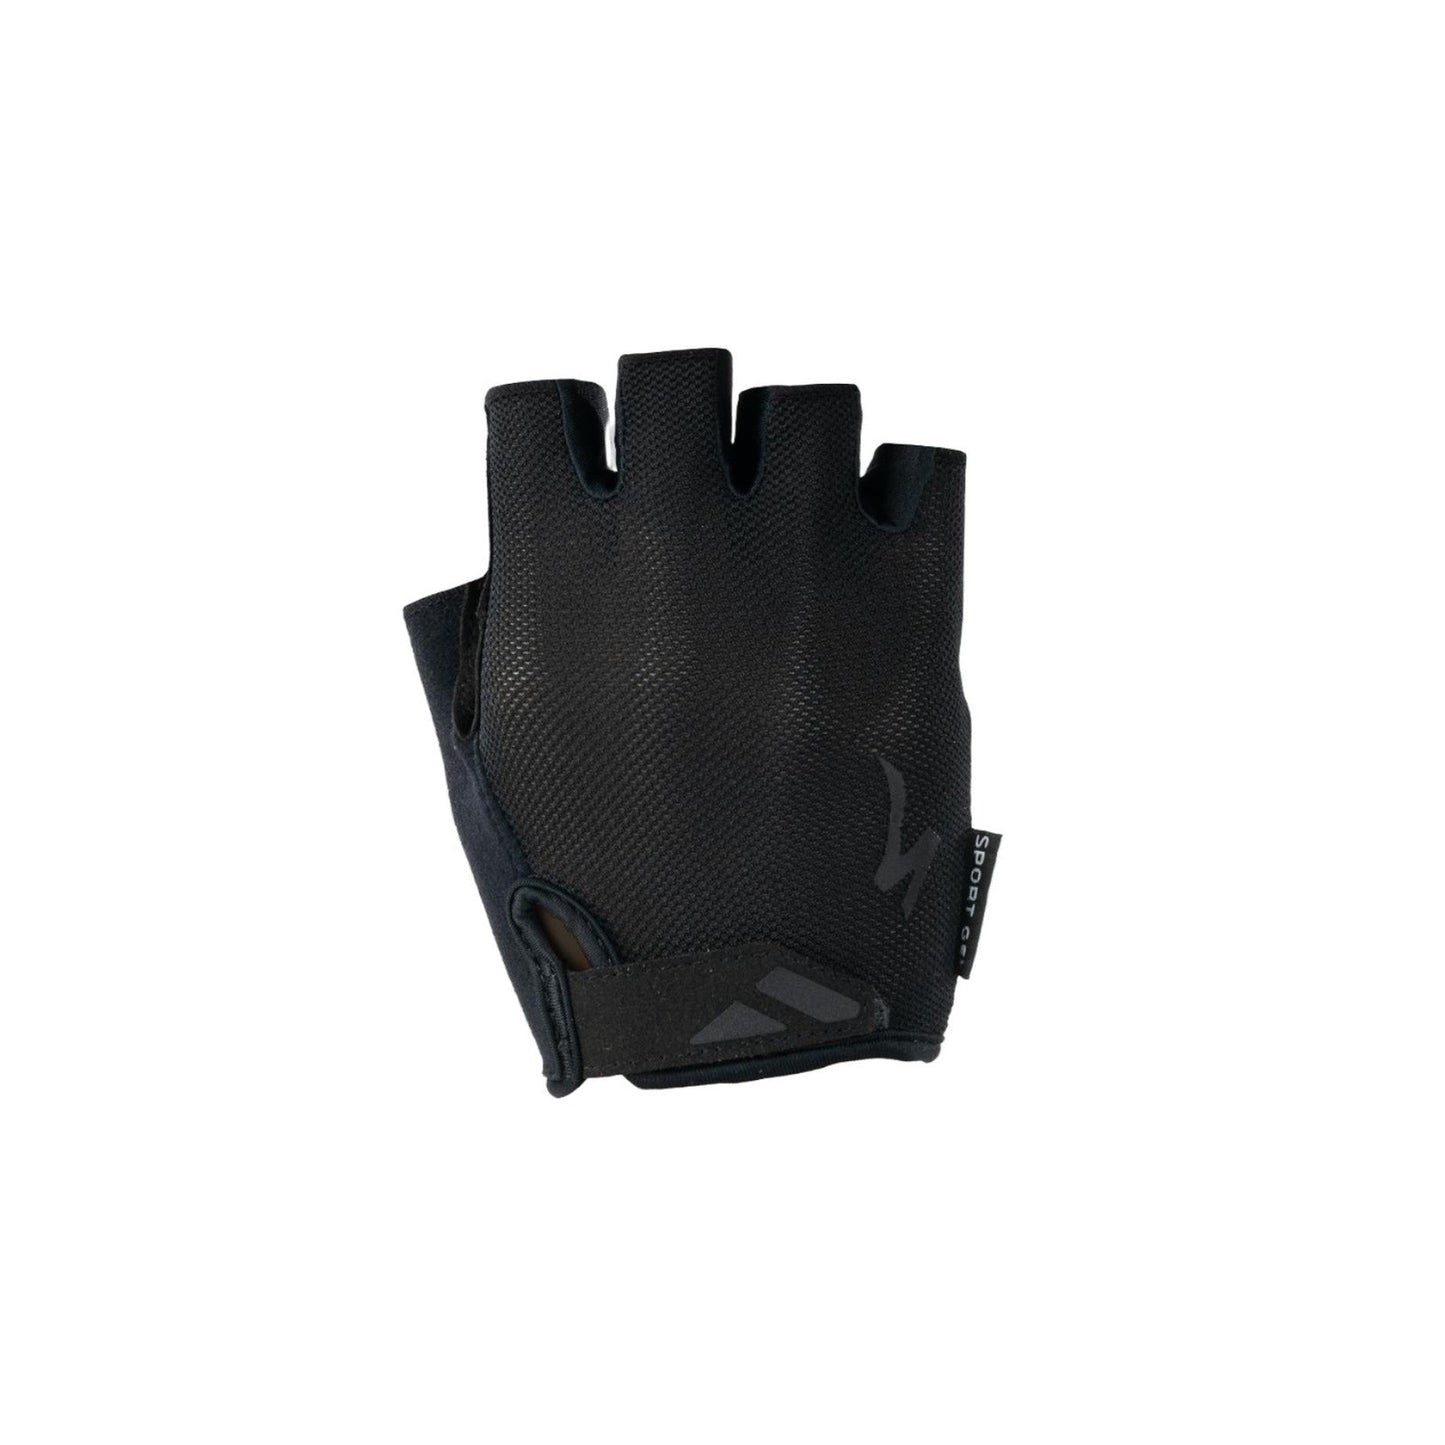 Body Geometry Sport Gel Gloves | Complete Cyclist - Comfortable, economical, and performance-driven, the Body Geometry Sport gloves are the perfect first-choice for riders more focused on comfort and a good time